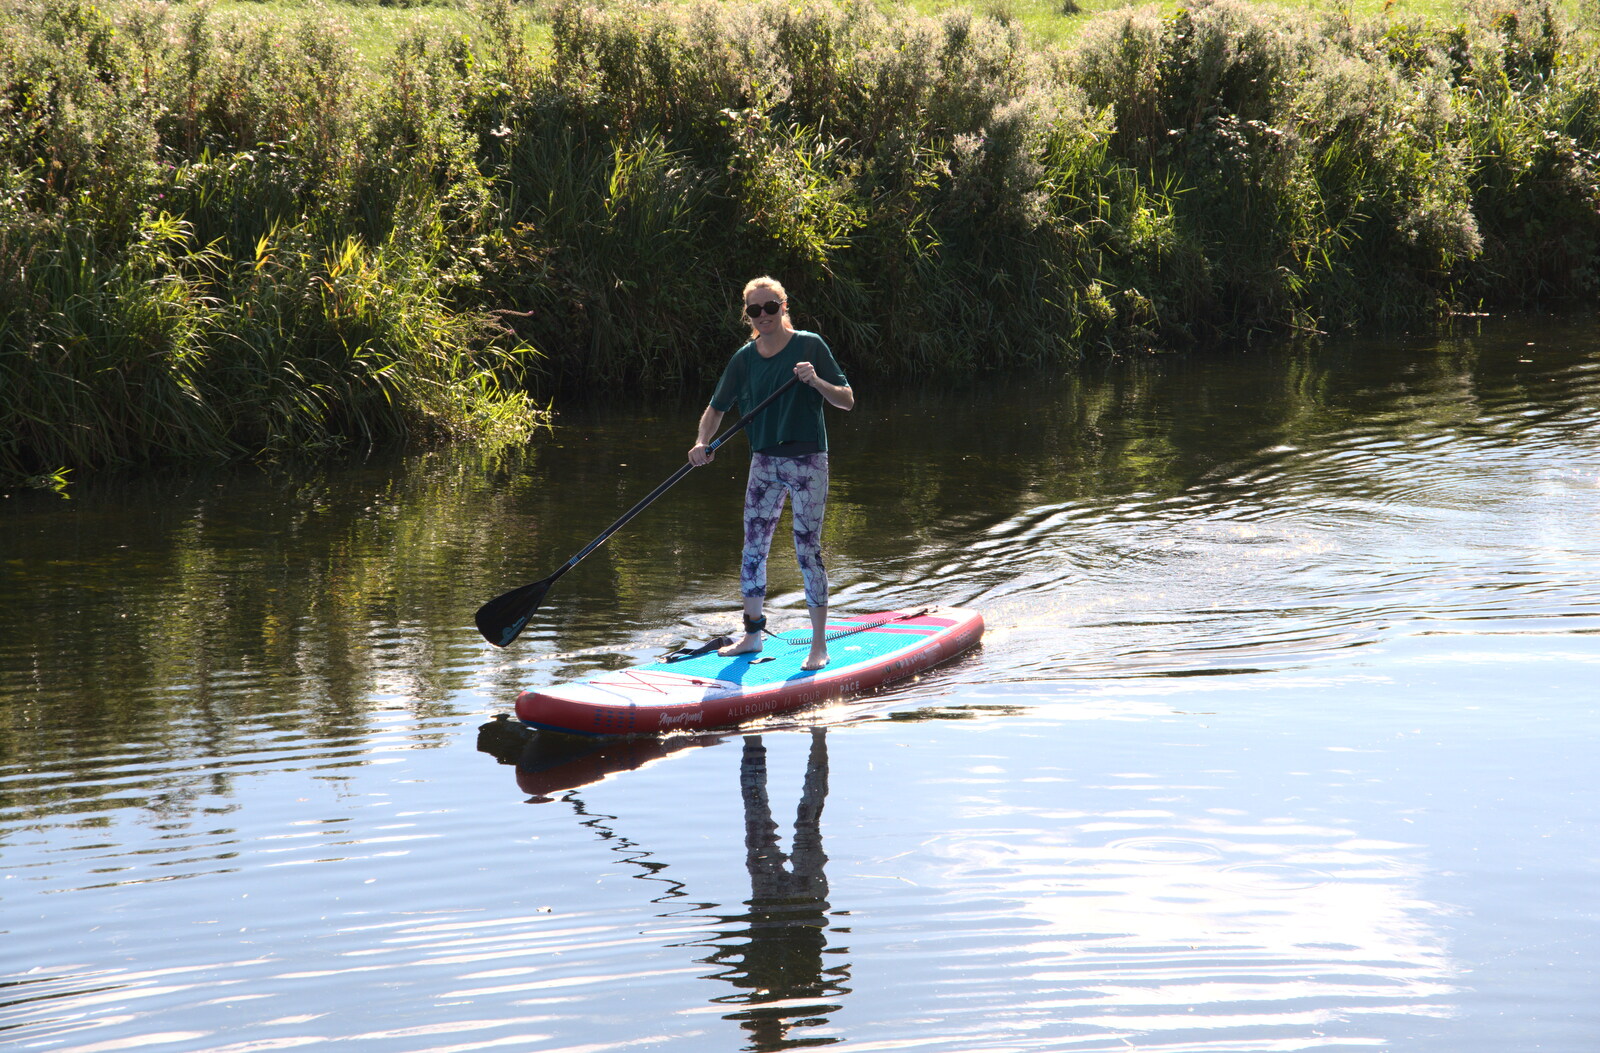 Camping at Three Rivers, Geldeston, Norfolk - 5th September 2020: Allyson is on the paddle board